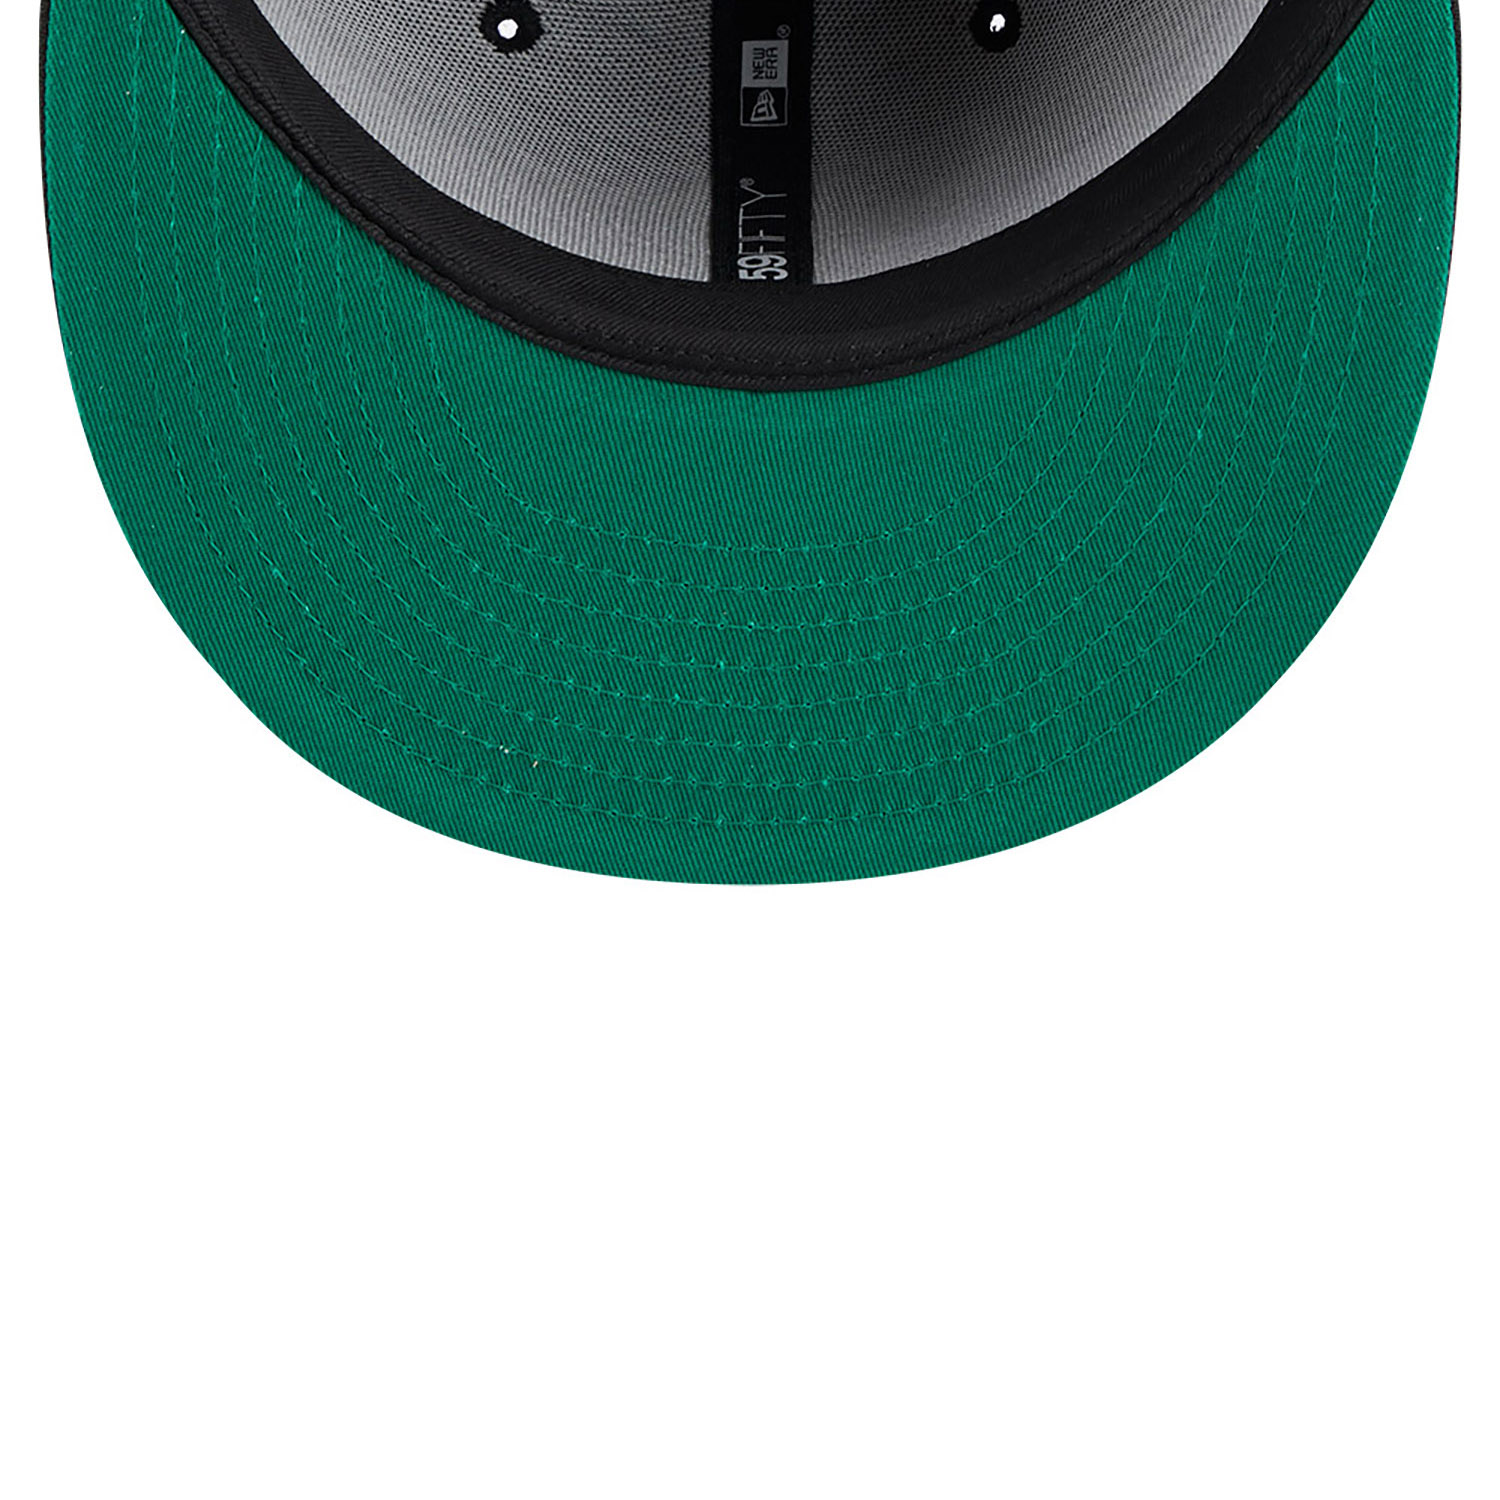 Chicago Cubs Metallic Green Pop Black 59FIFTY Fitted Cap